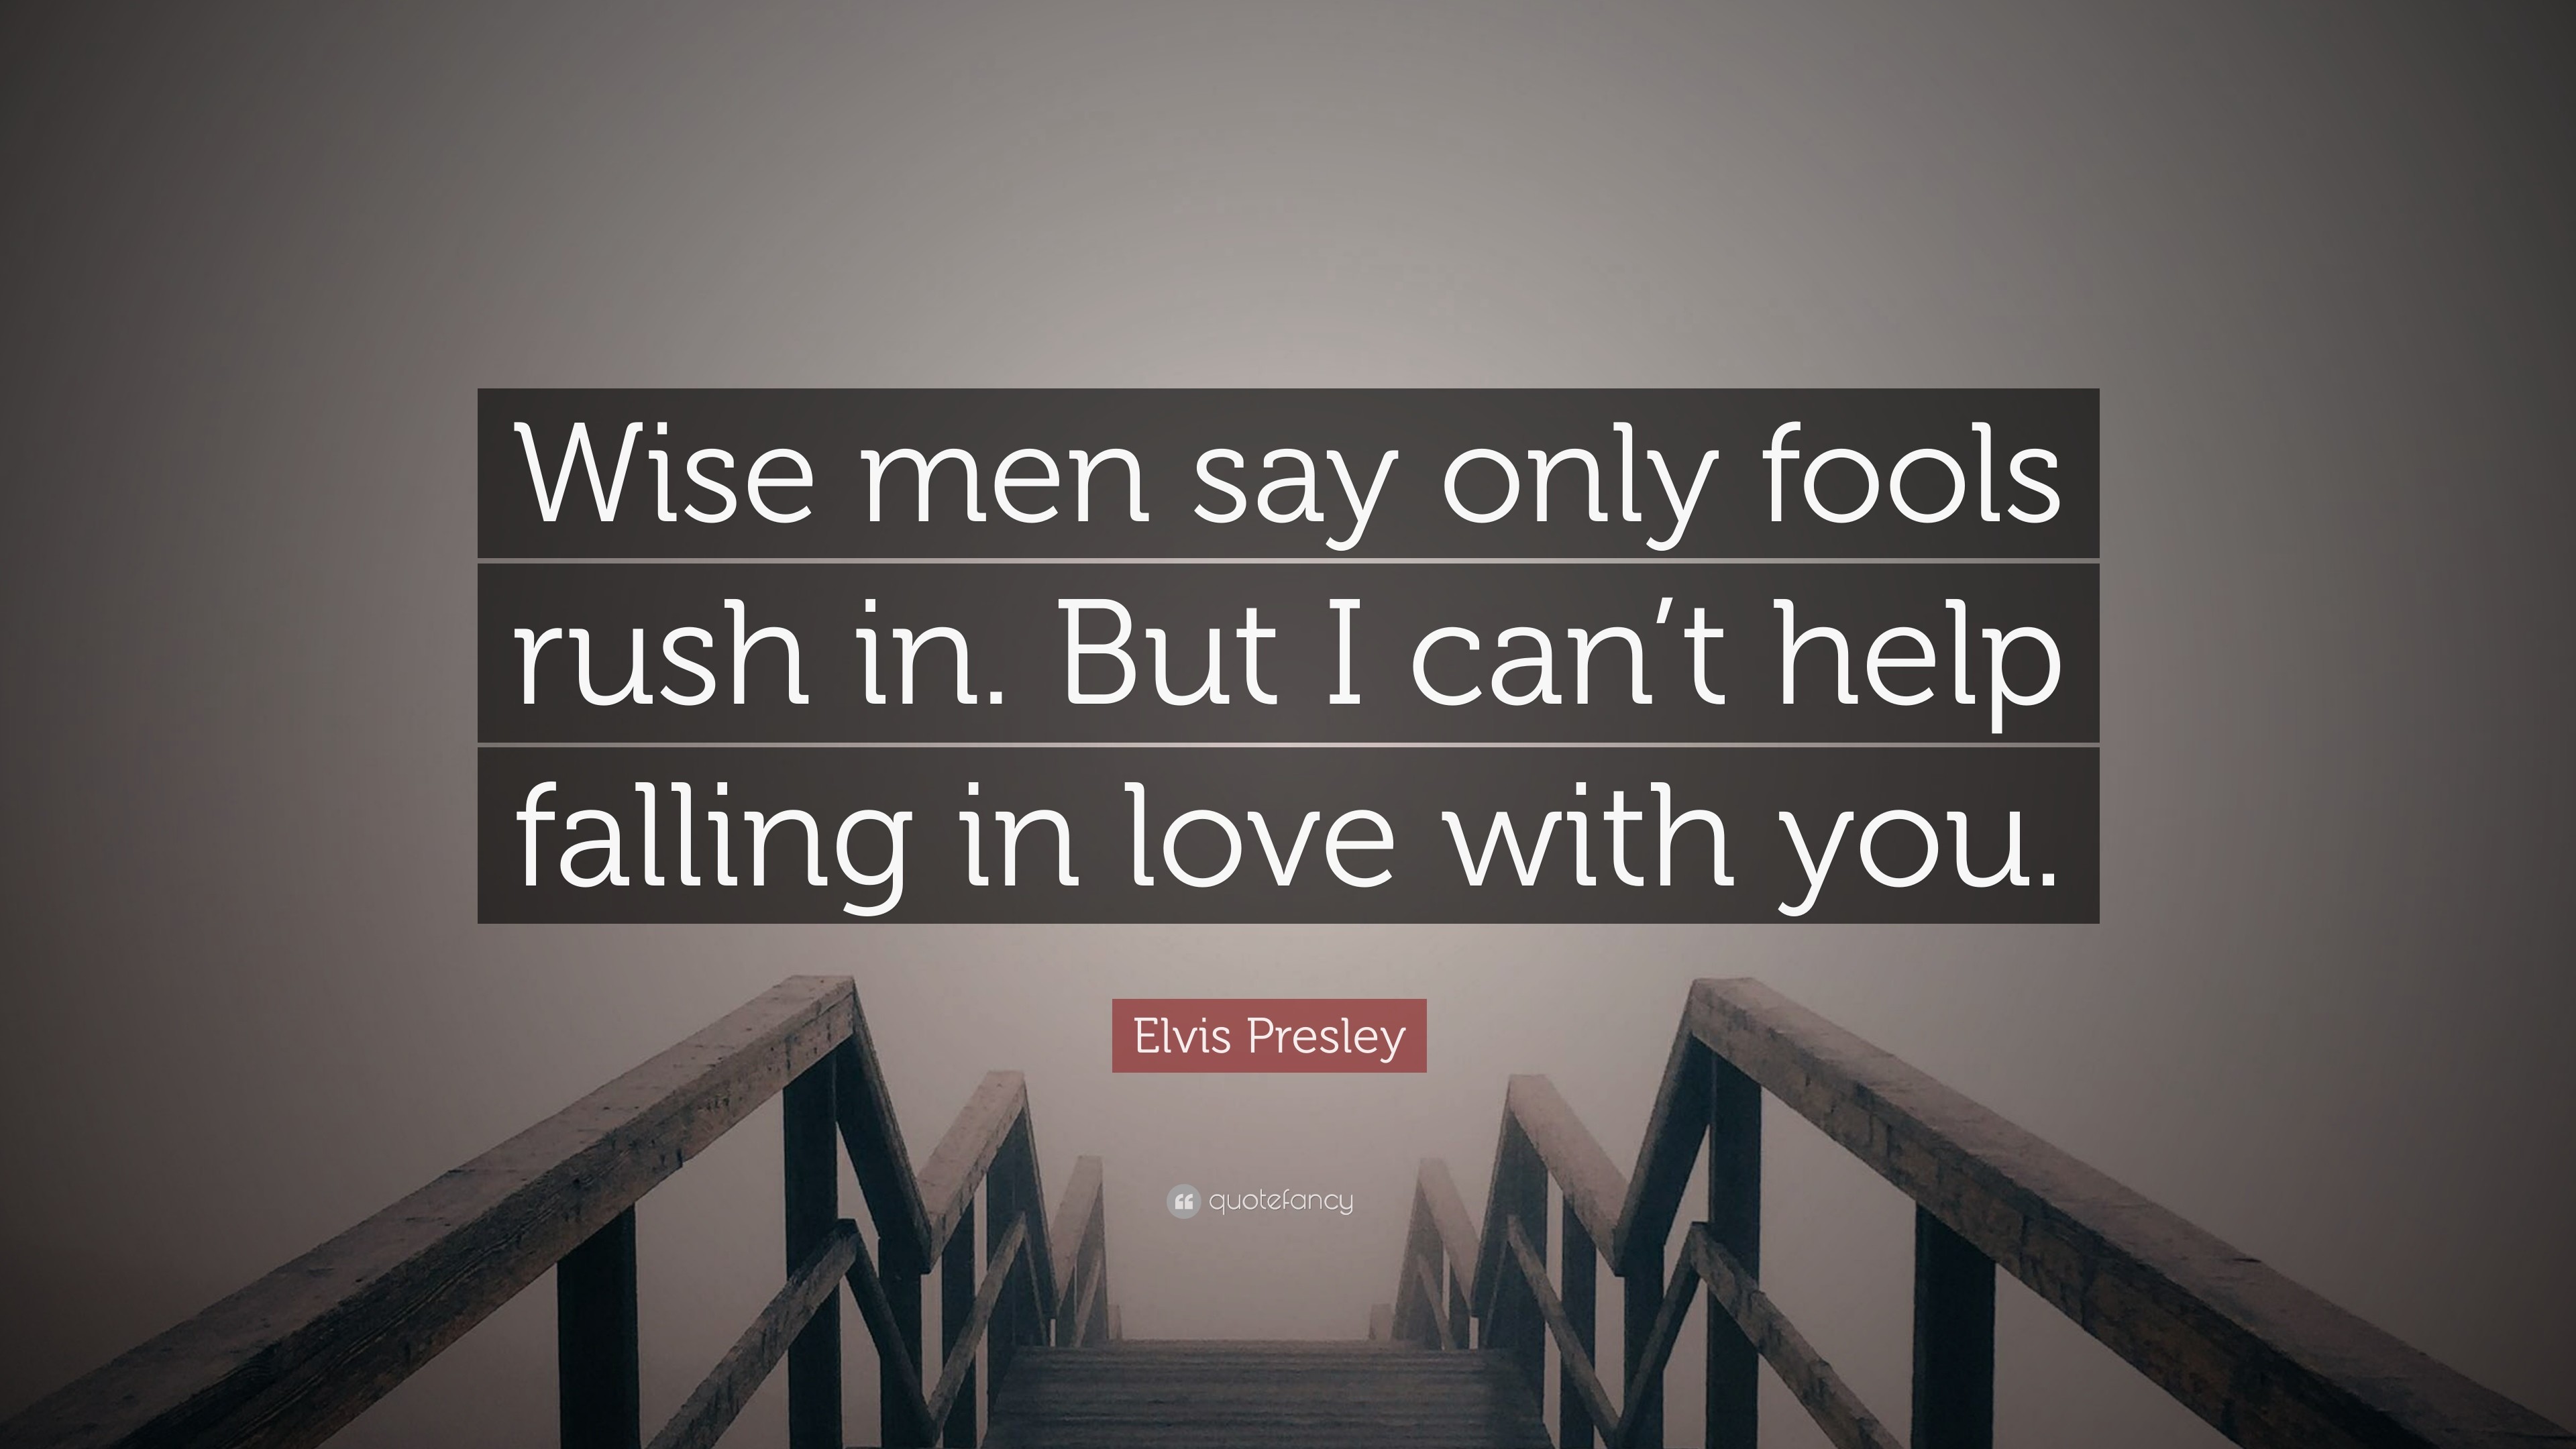 3840x2160 Elvis Presley Quote: “Wise men say only fools rush in. But I can